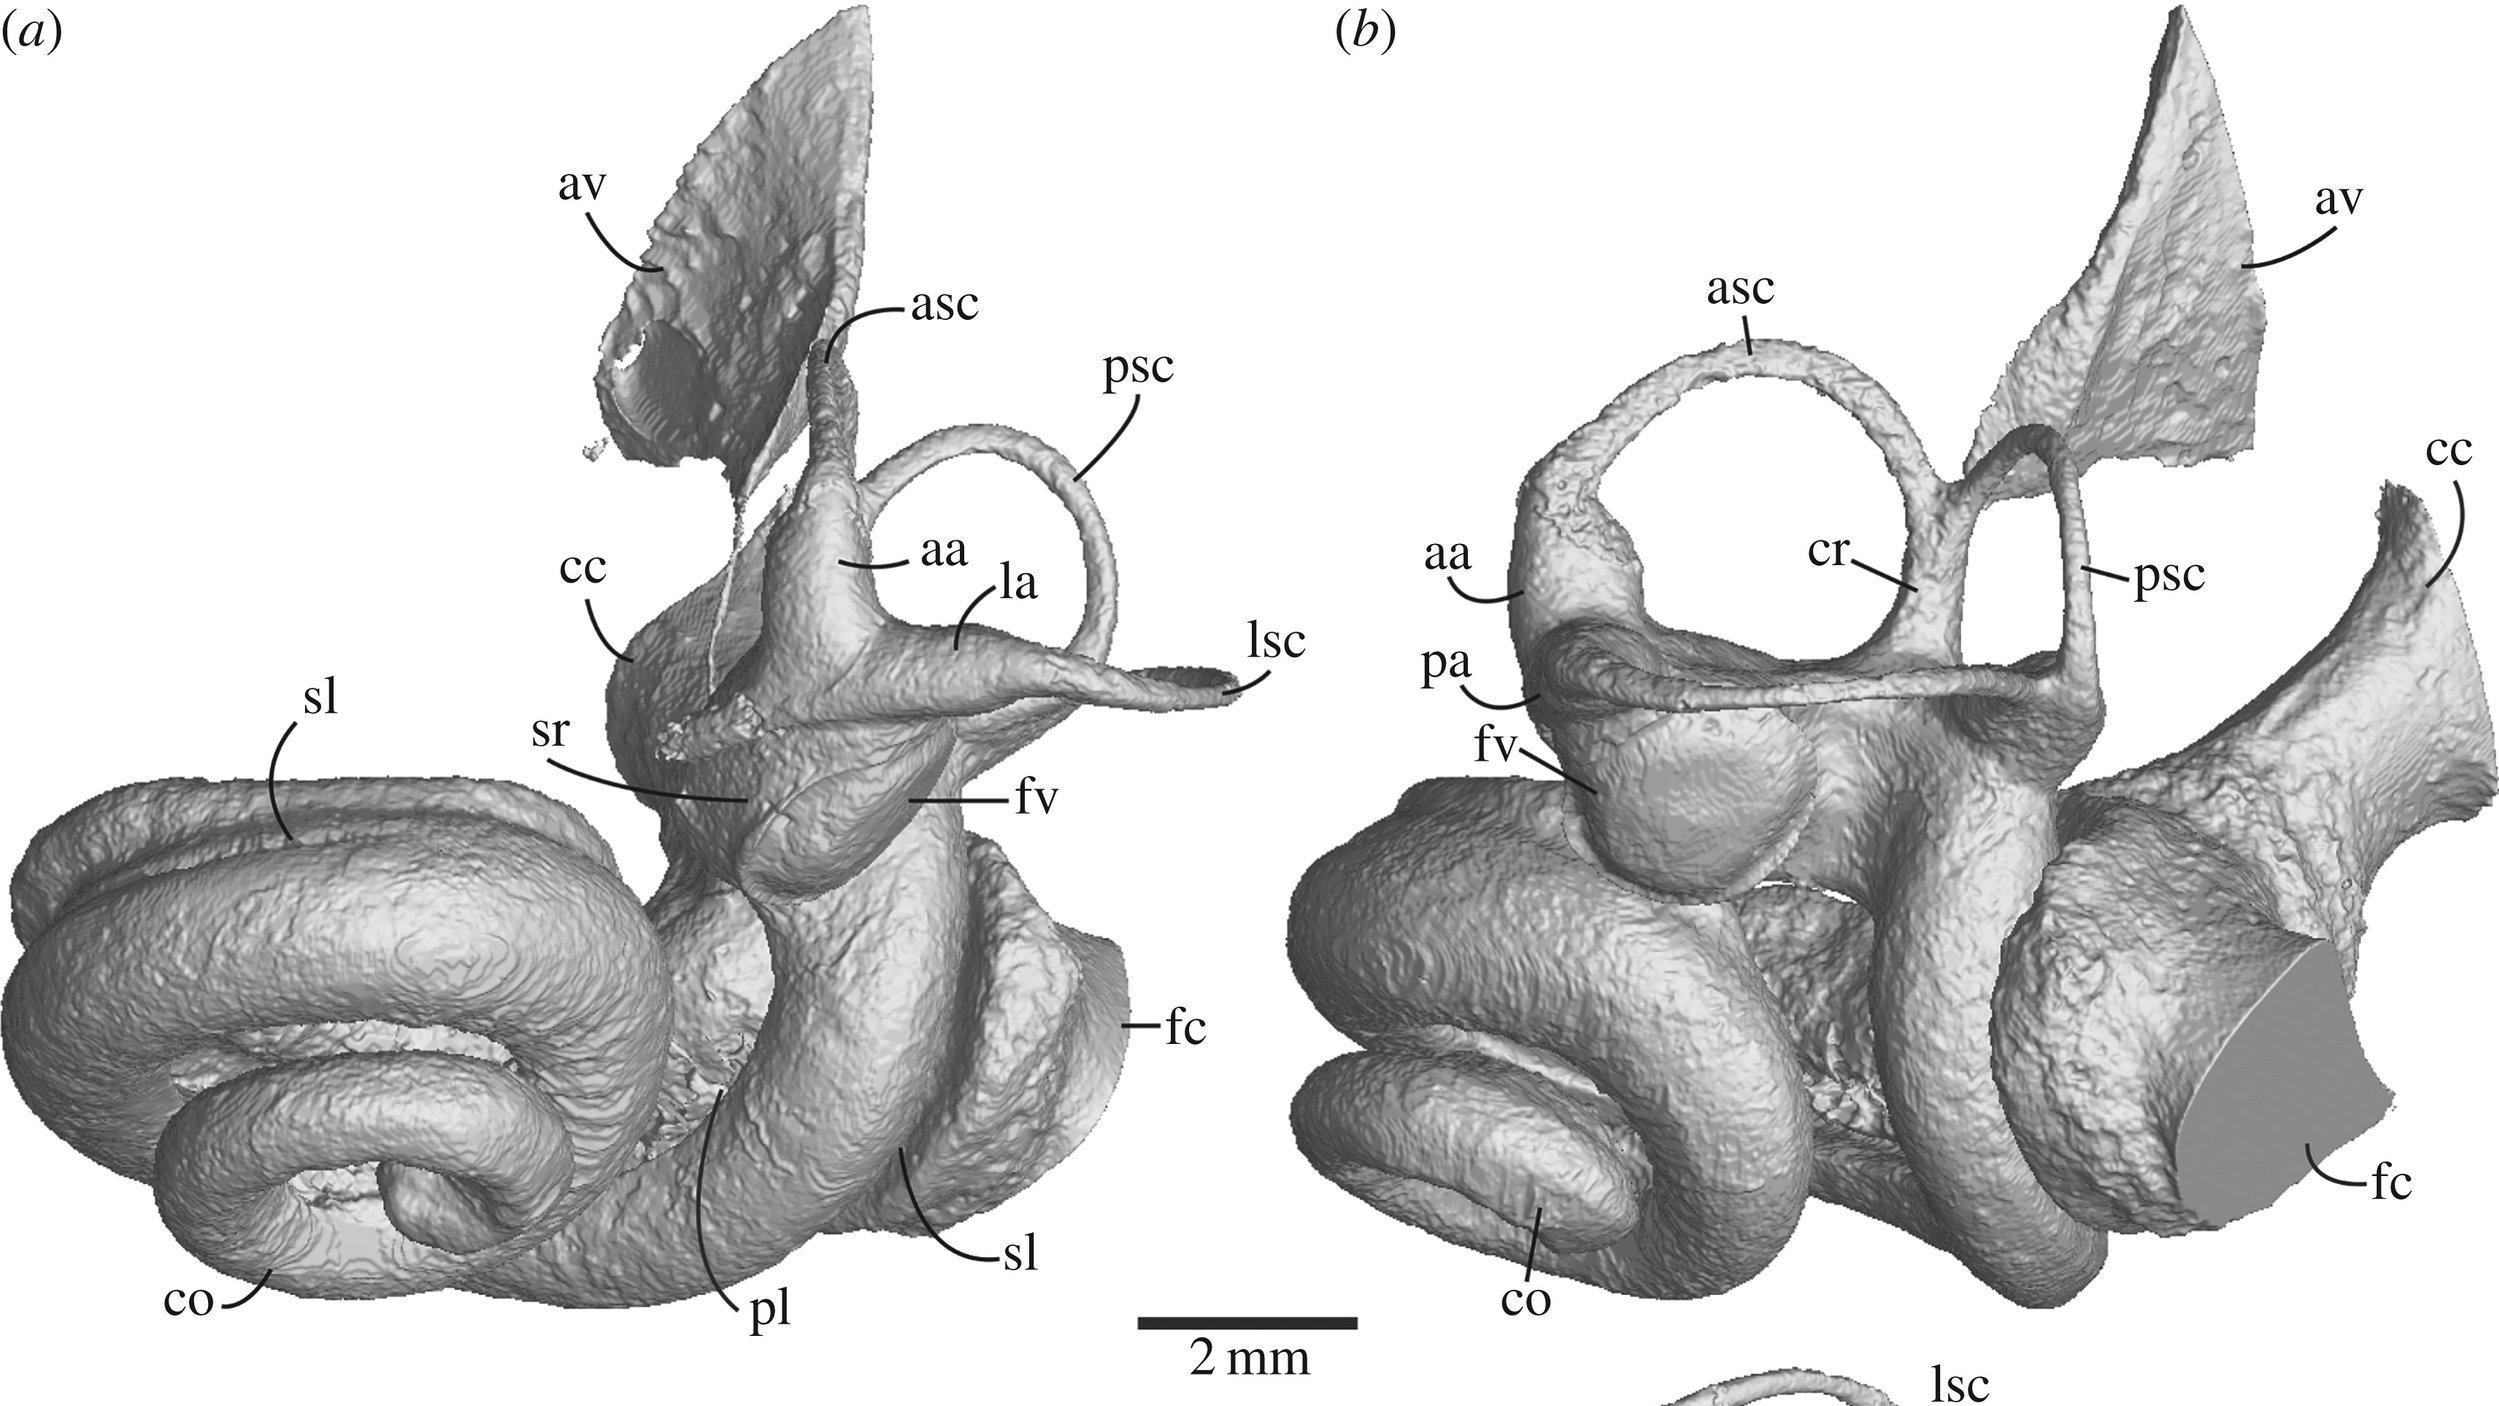 Bony labyrinth (inner ear) of odontoceti (toothed whale)